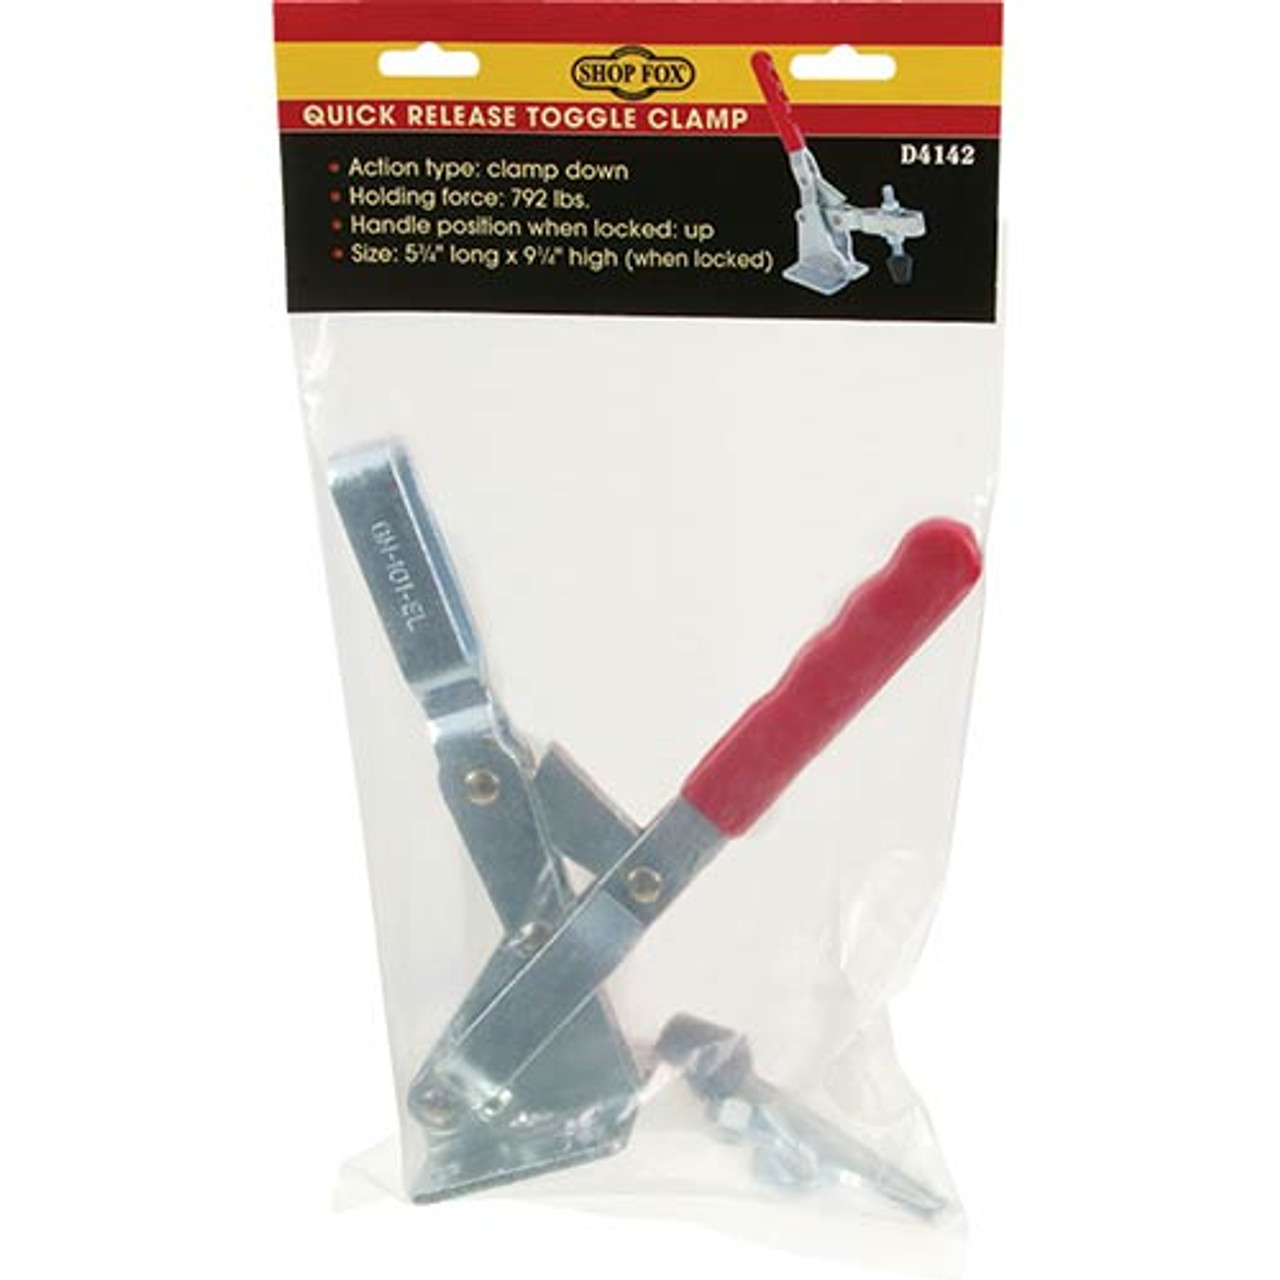 Woodstock Shop Fox 5-3/4" x 9" Clamp Down Quick Release Toggle Clamp D4142